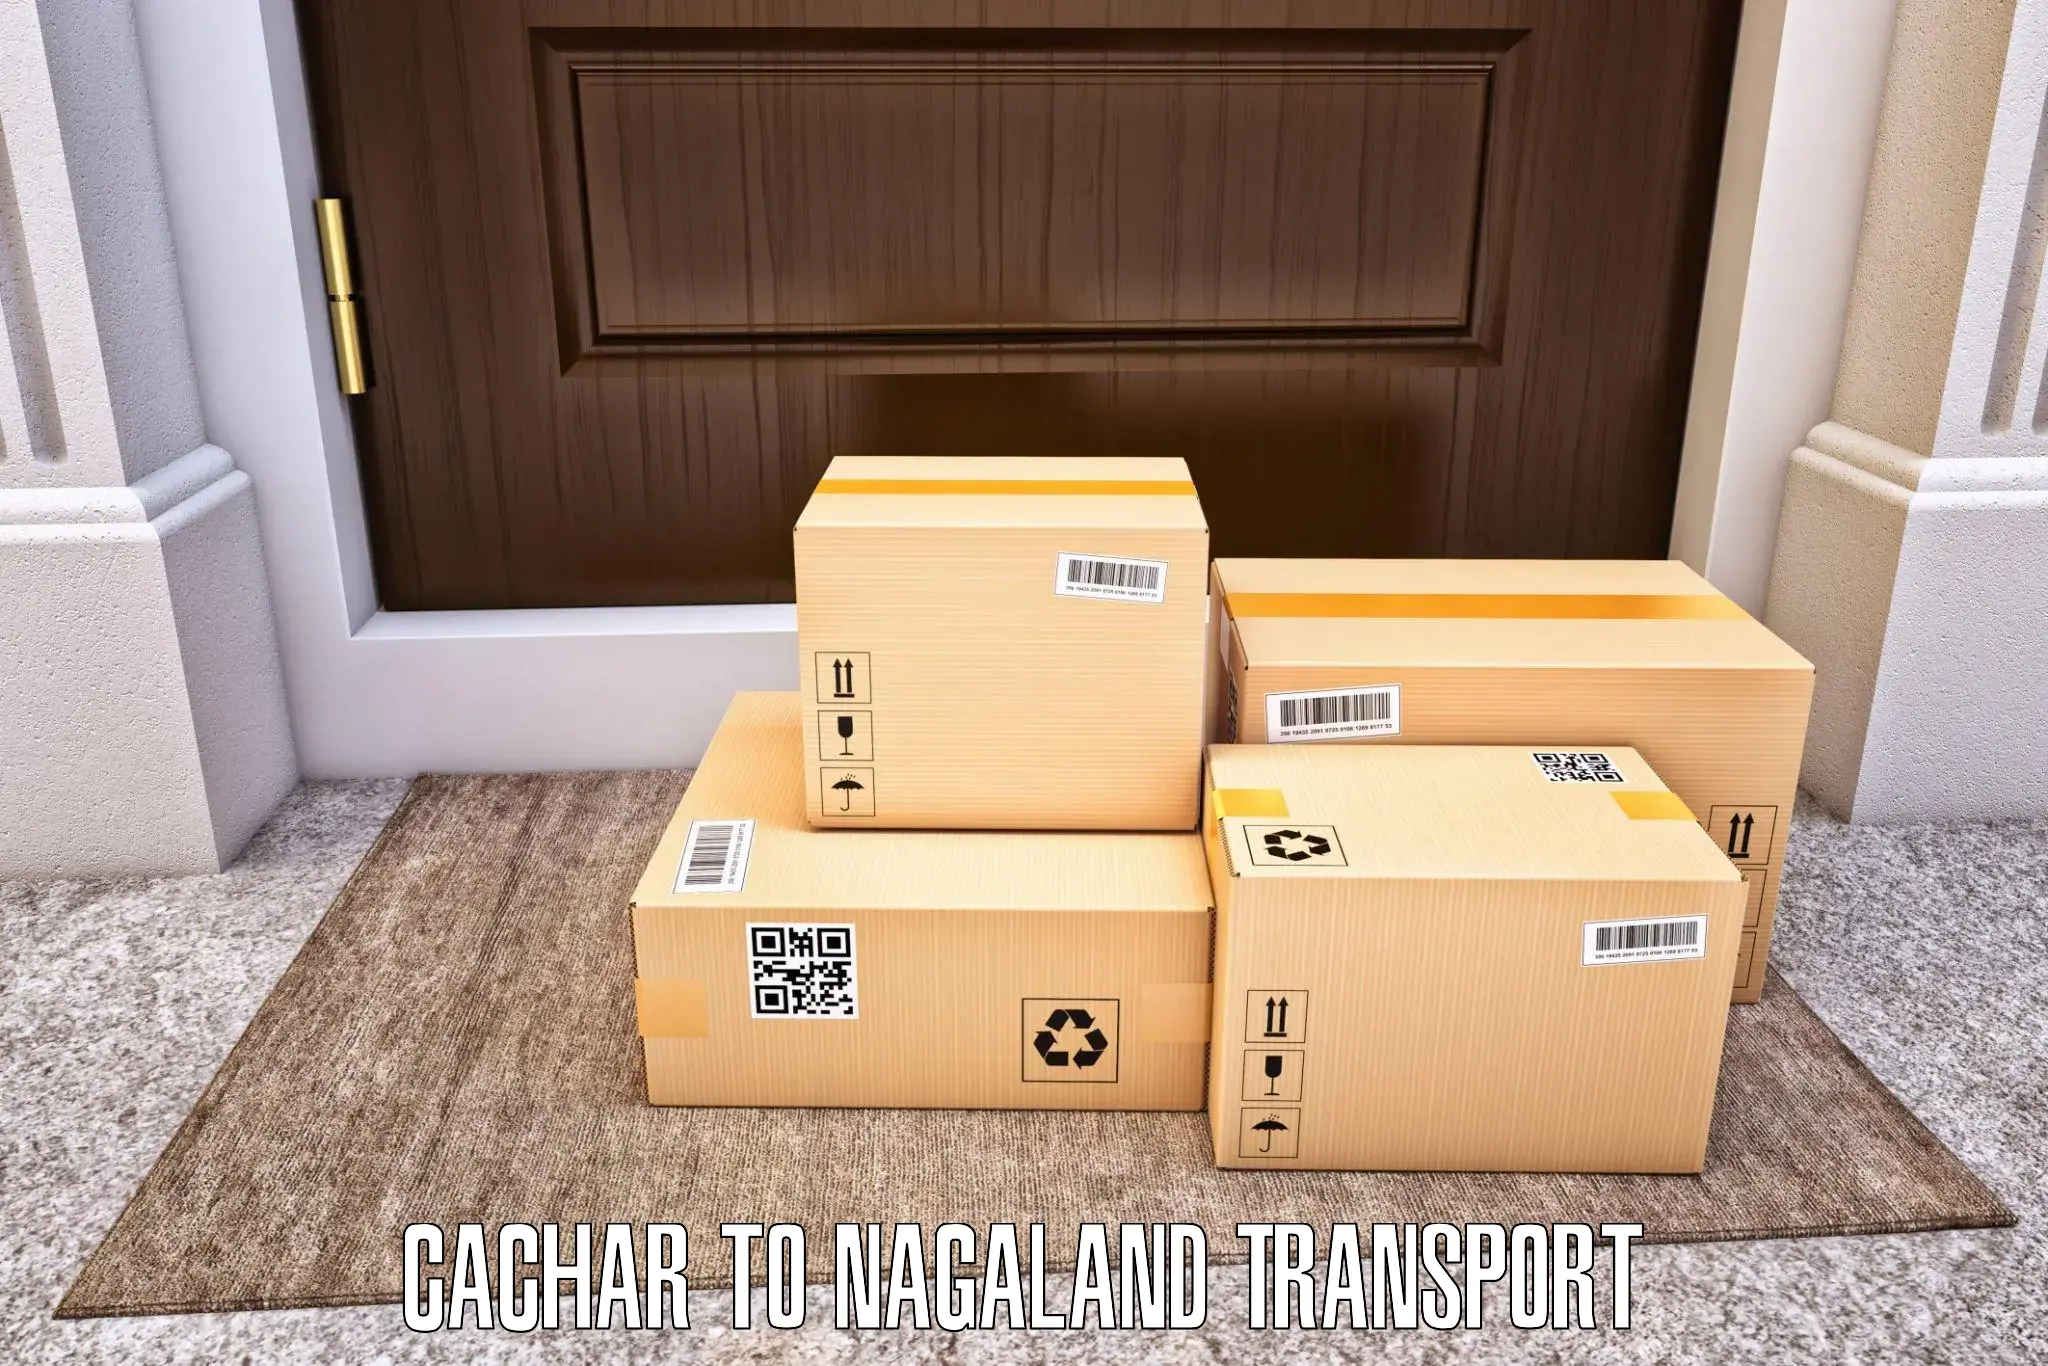 Vehicle transport services Cachar to Mon